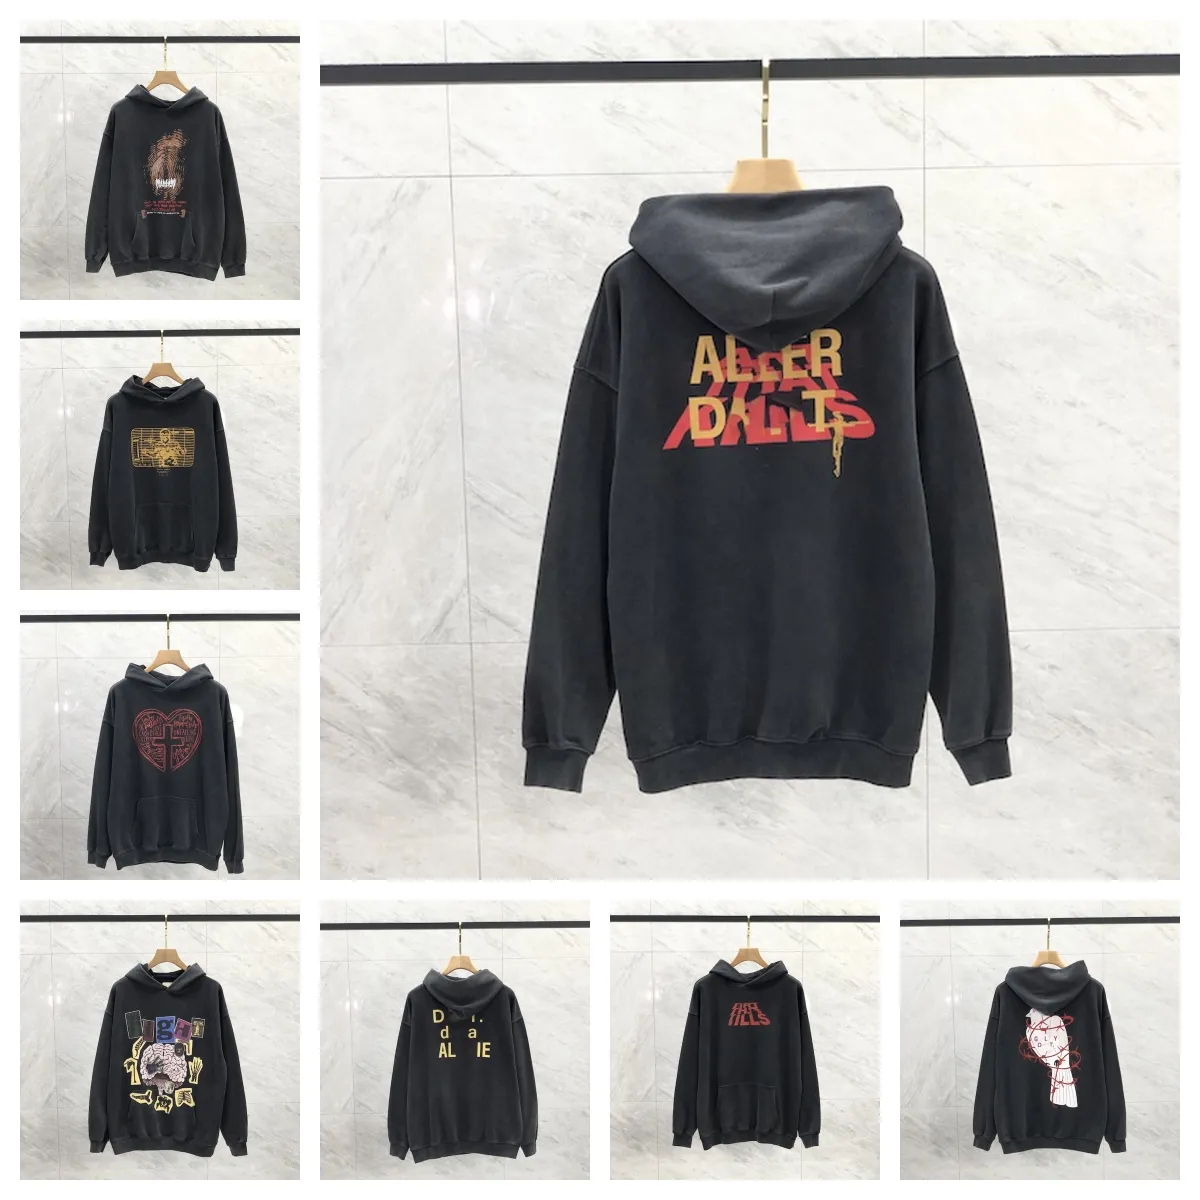 2023 Mens Hoodies Fashion Women Hoodie Autumn Winter Hooded Pullover Round Neck Long Sleeve Clothes Sweatshirts Jacket Jumpers Size M-xl